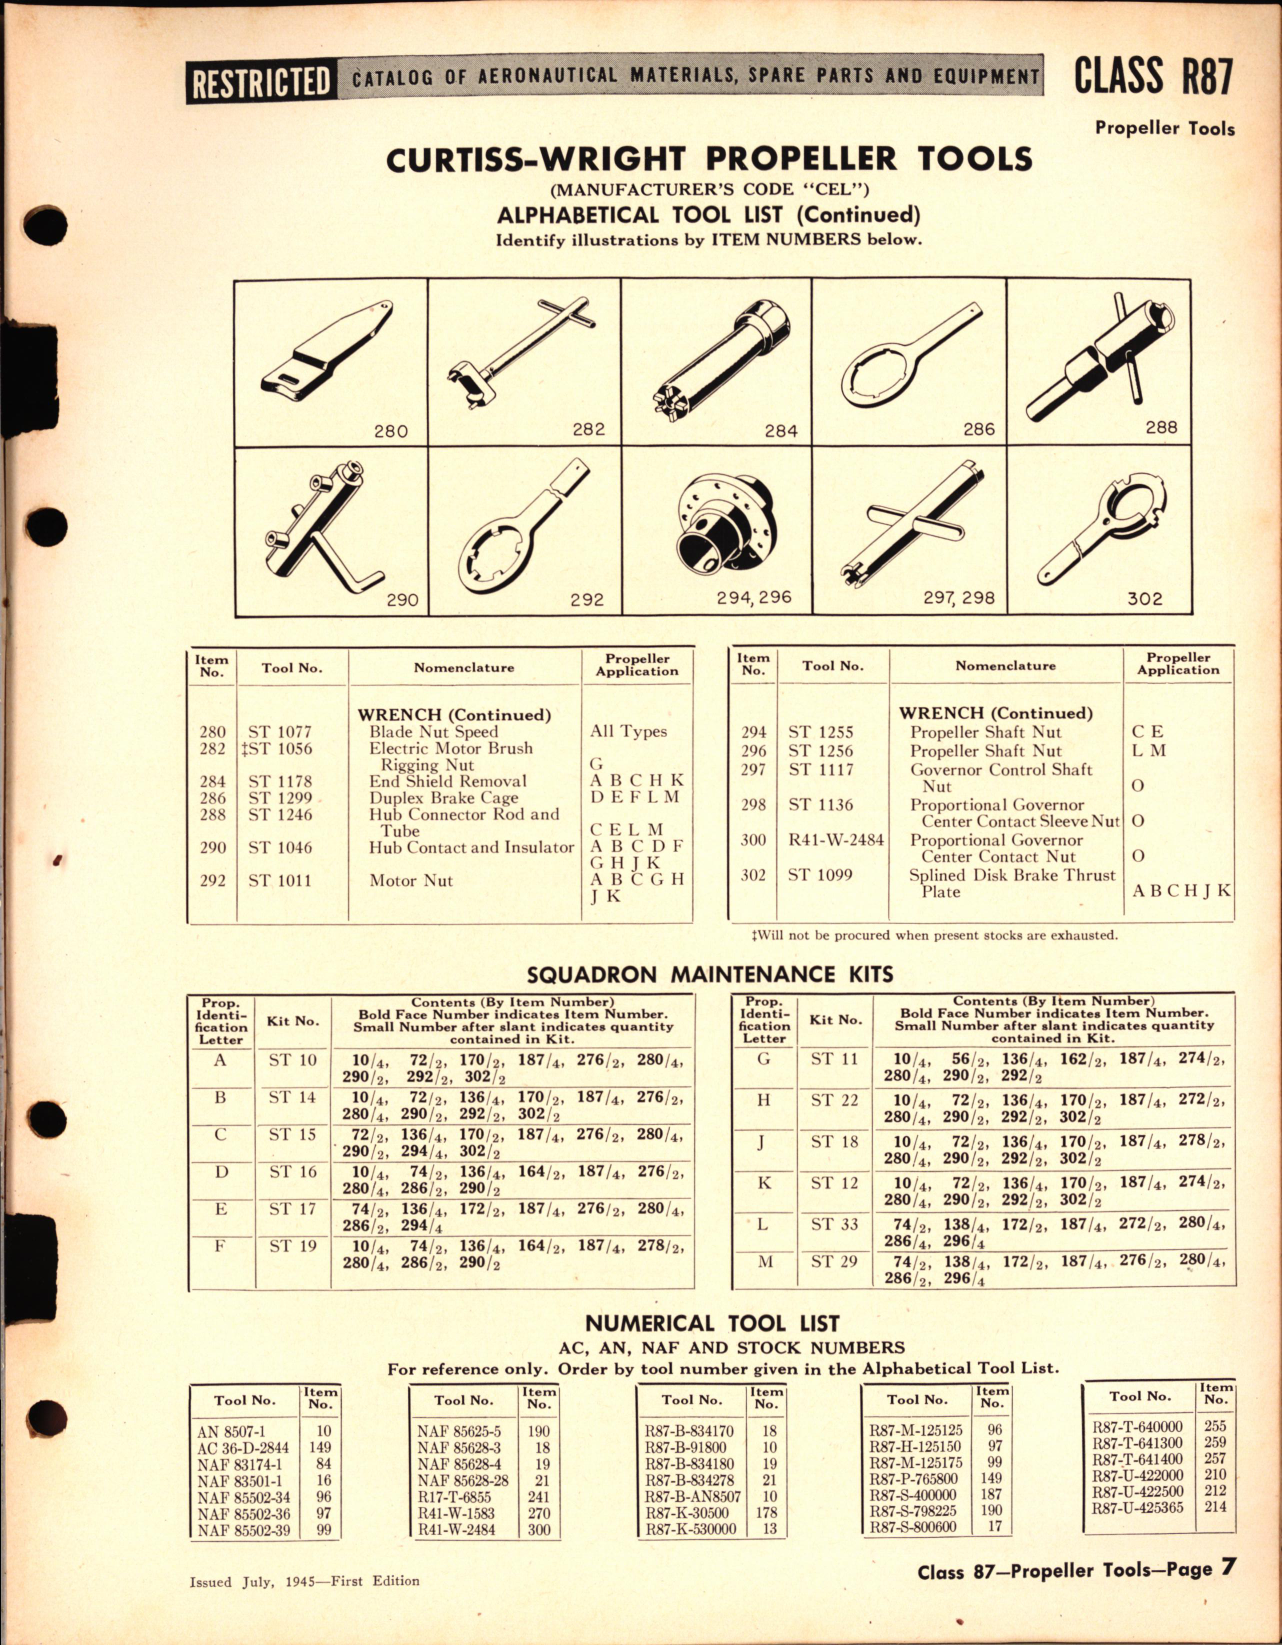 Sample page 7 from AirCorps Library document: Propeller Tools